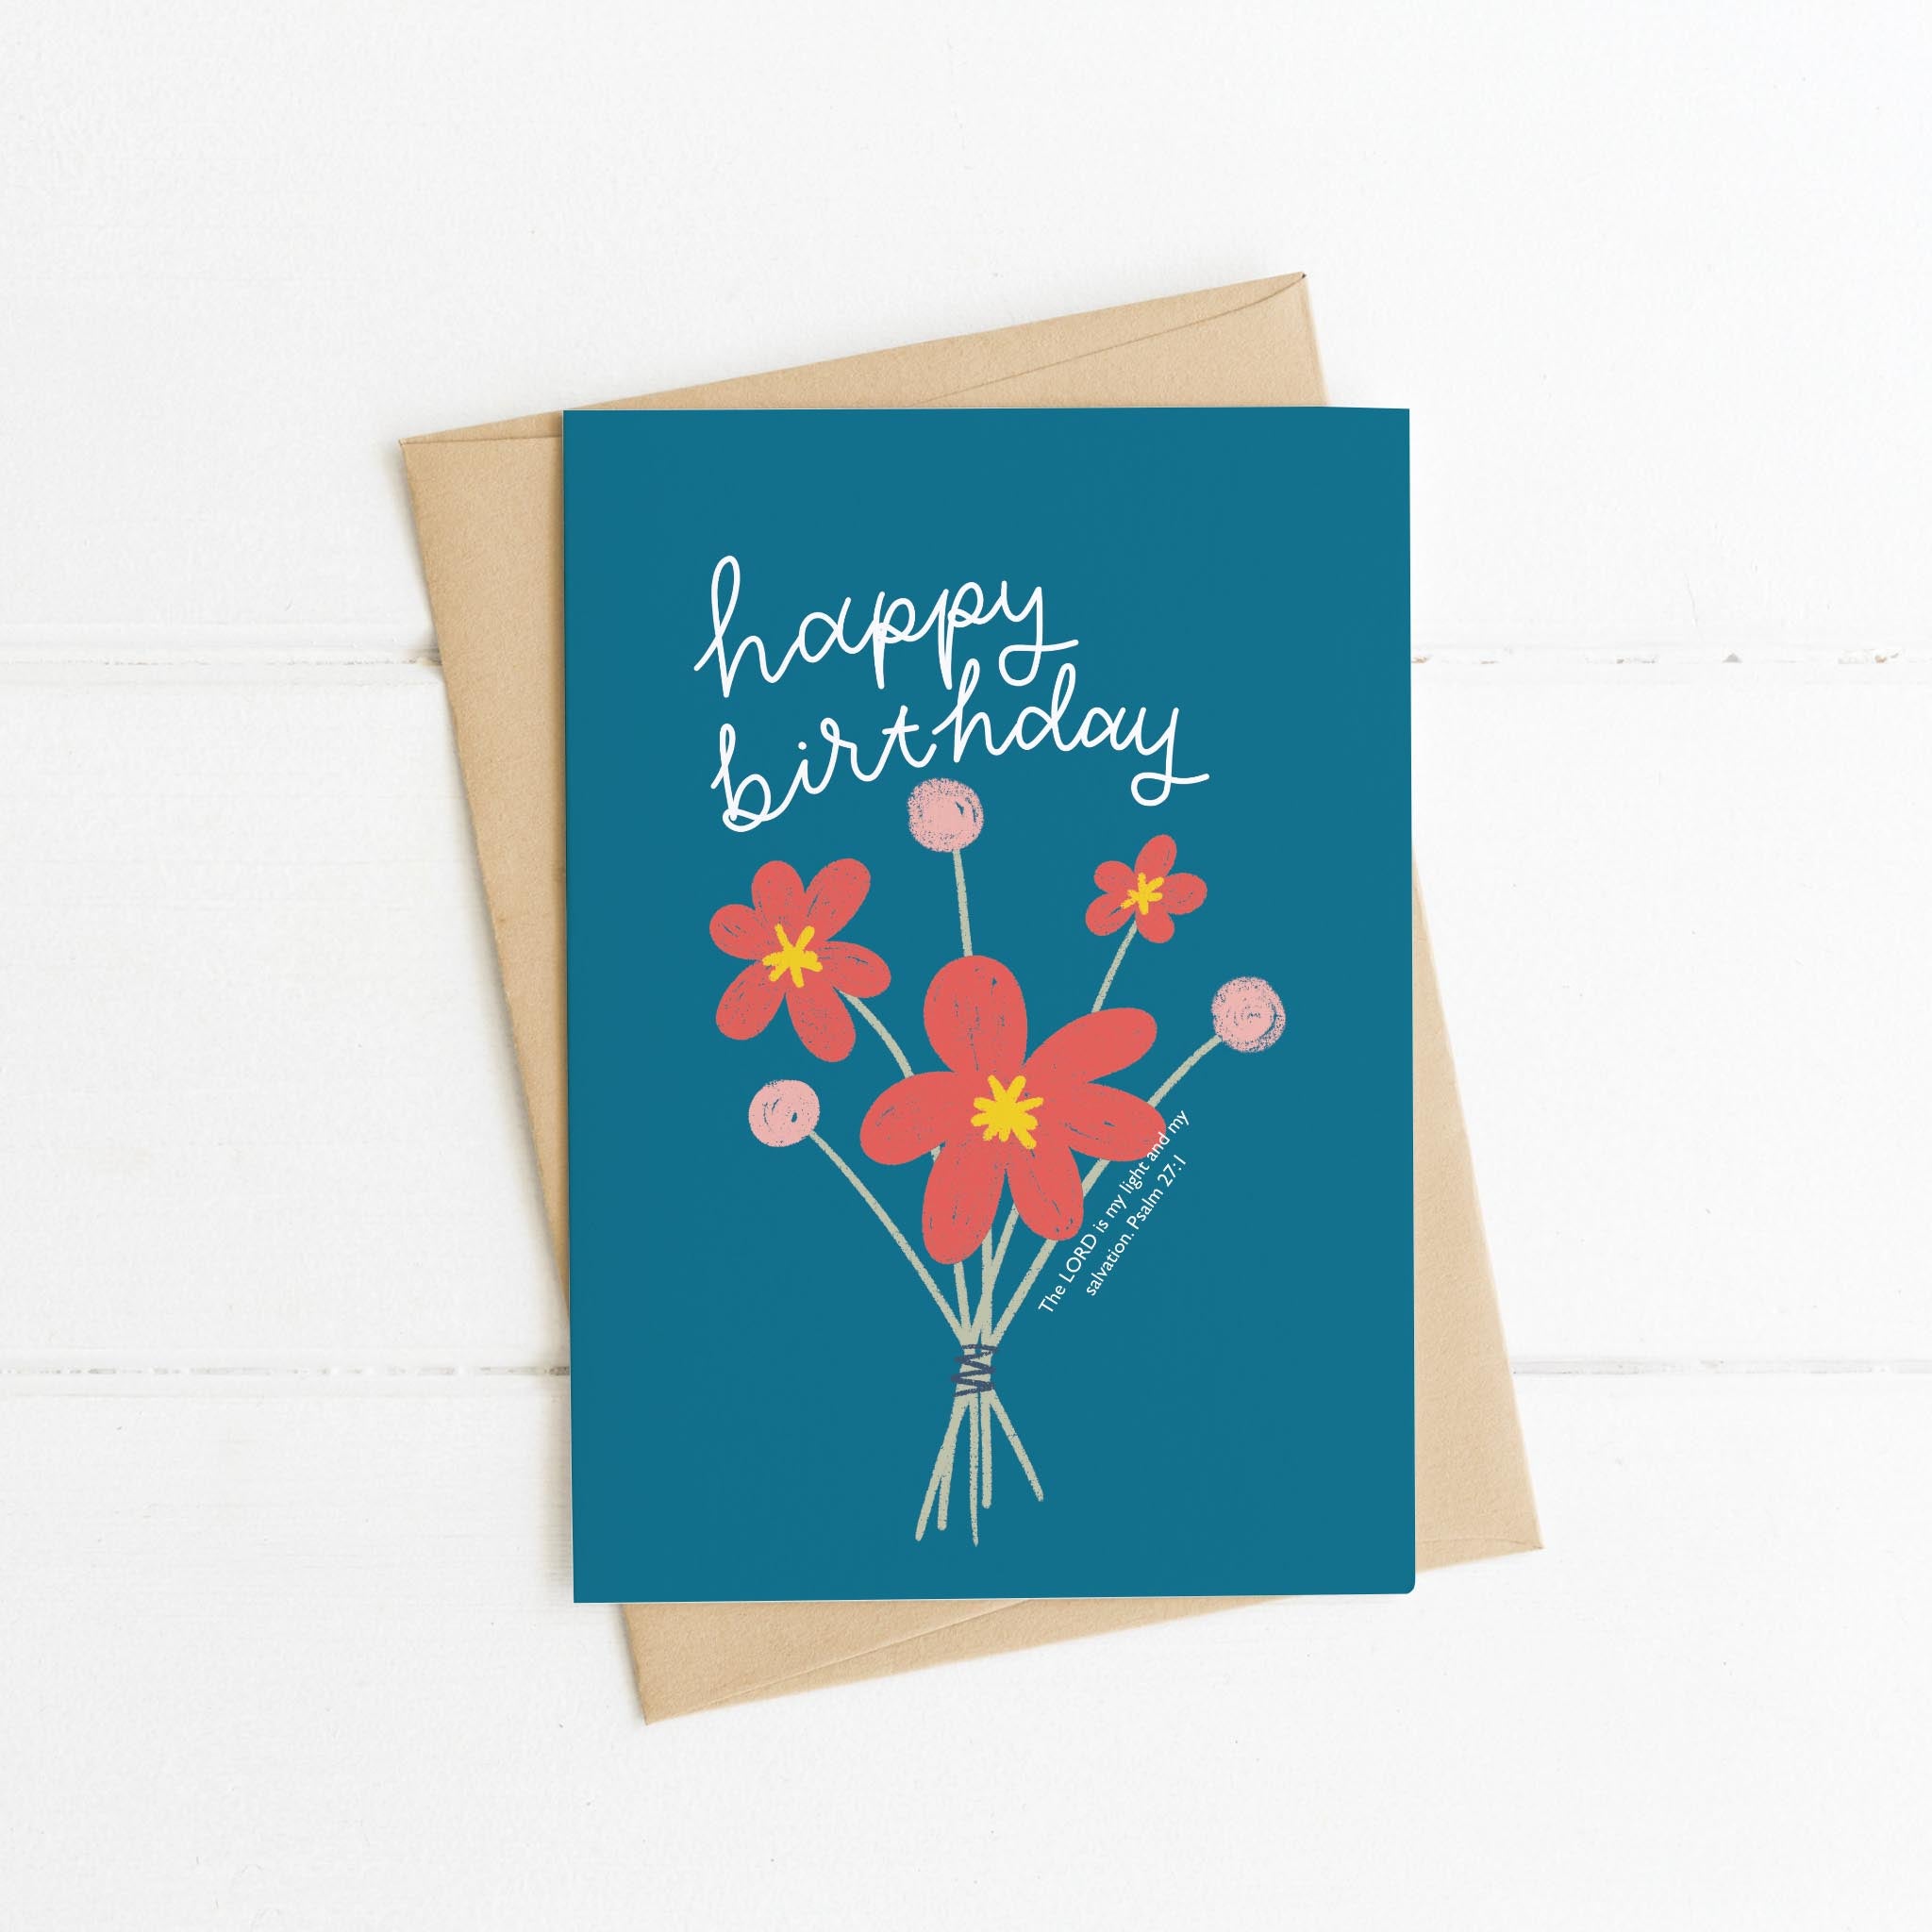 Happy Birthday Floral Bible Verse Birthday Card - Psalm 27:1 with recycled kraft envelope.